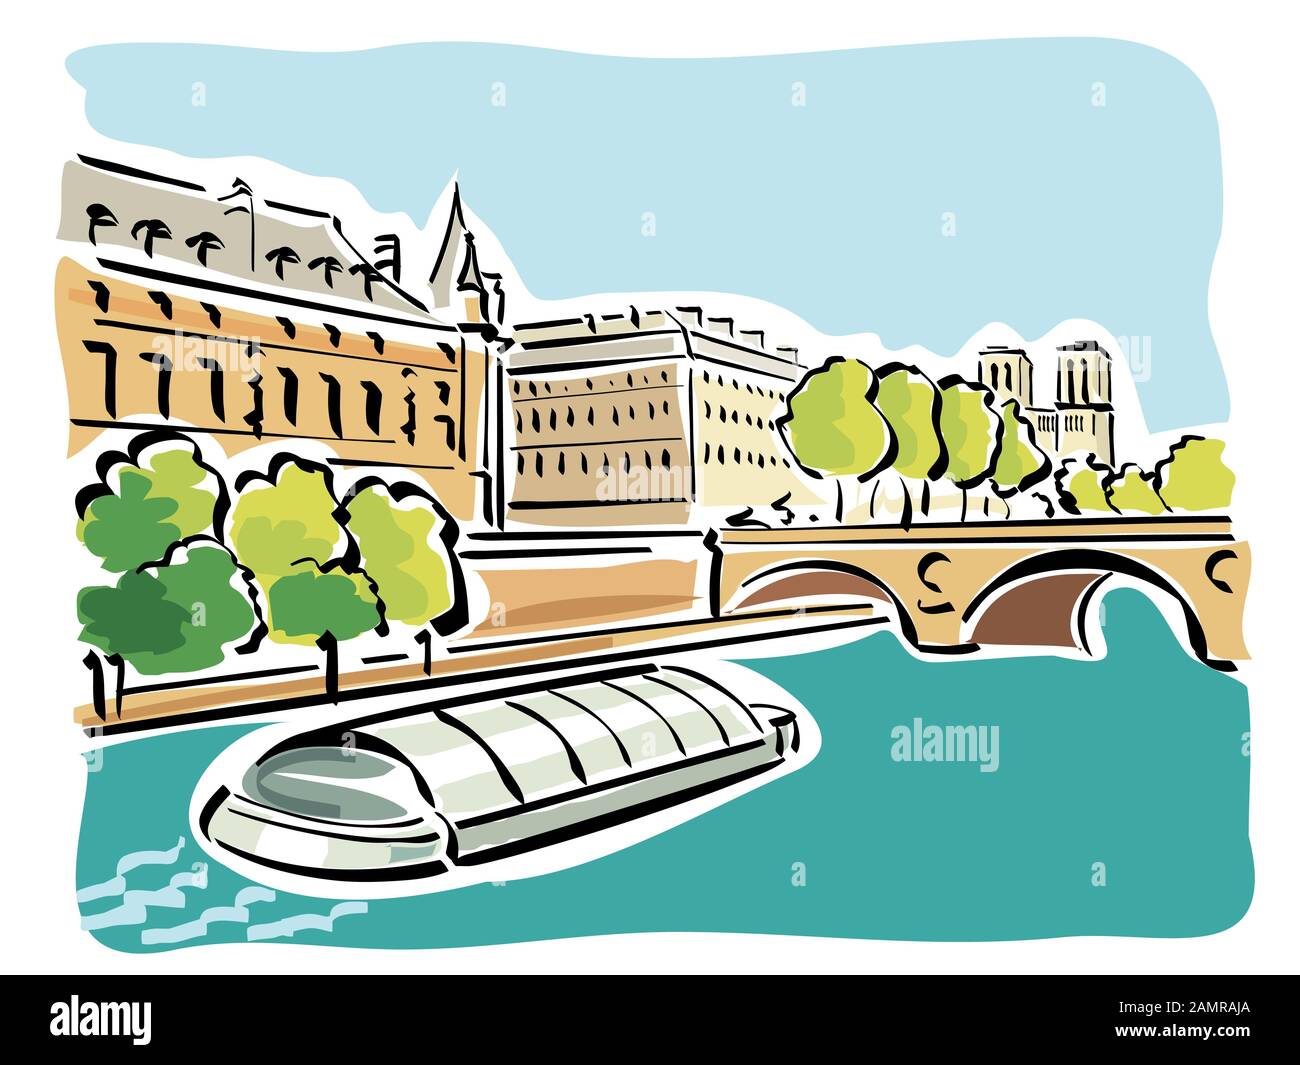 Illustration of the Bateaux Mouches on the seine river in Paris. Stock Photo